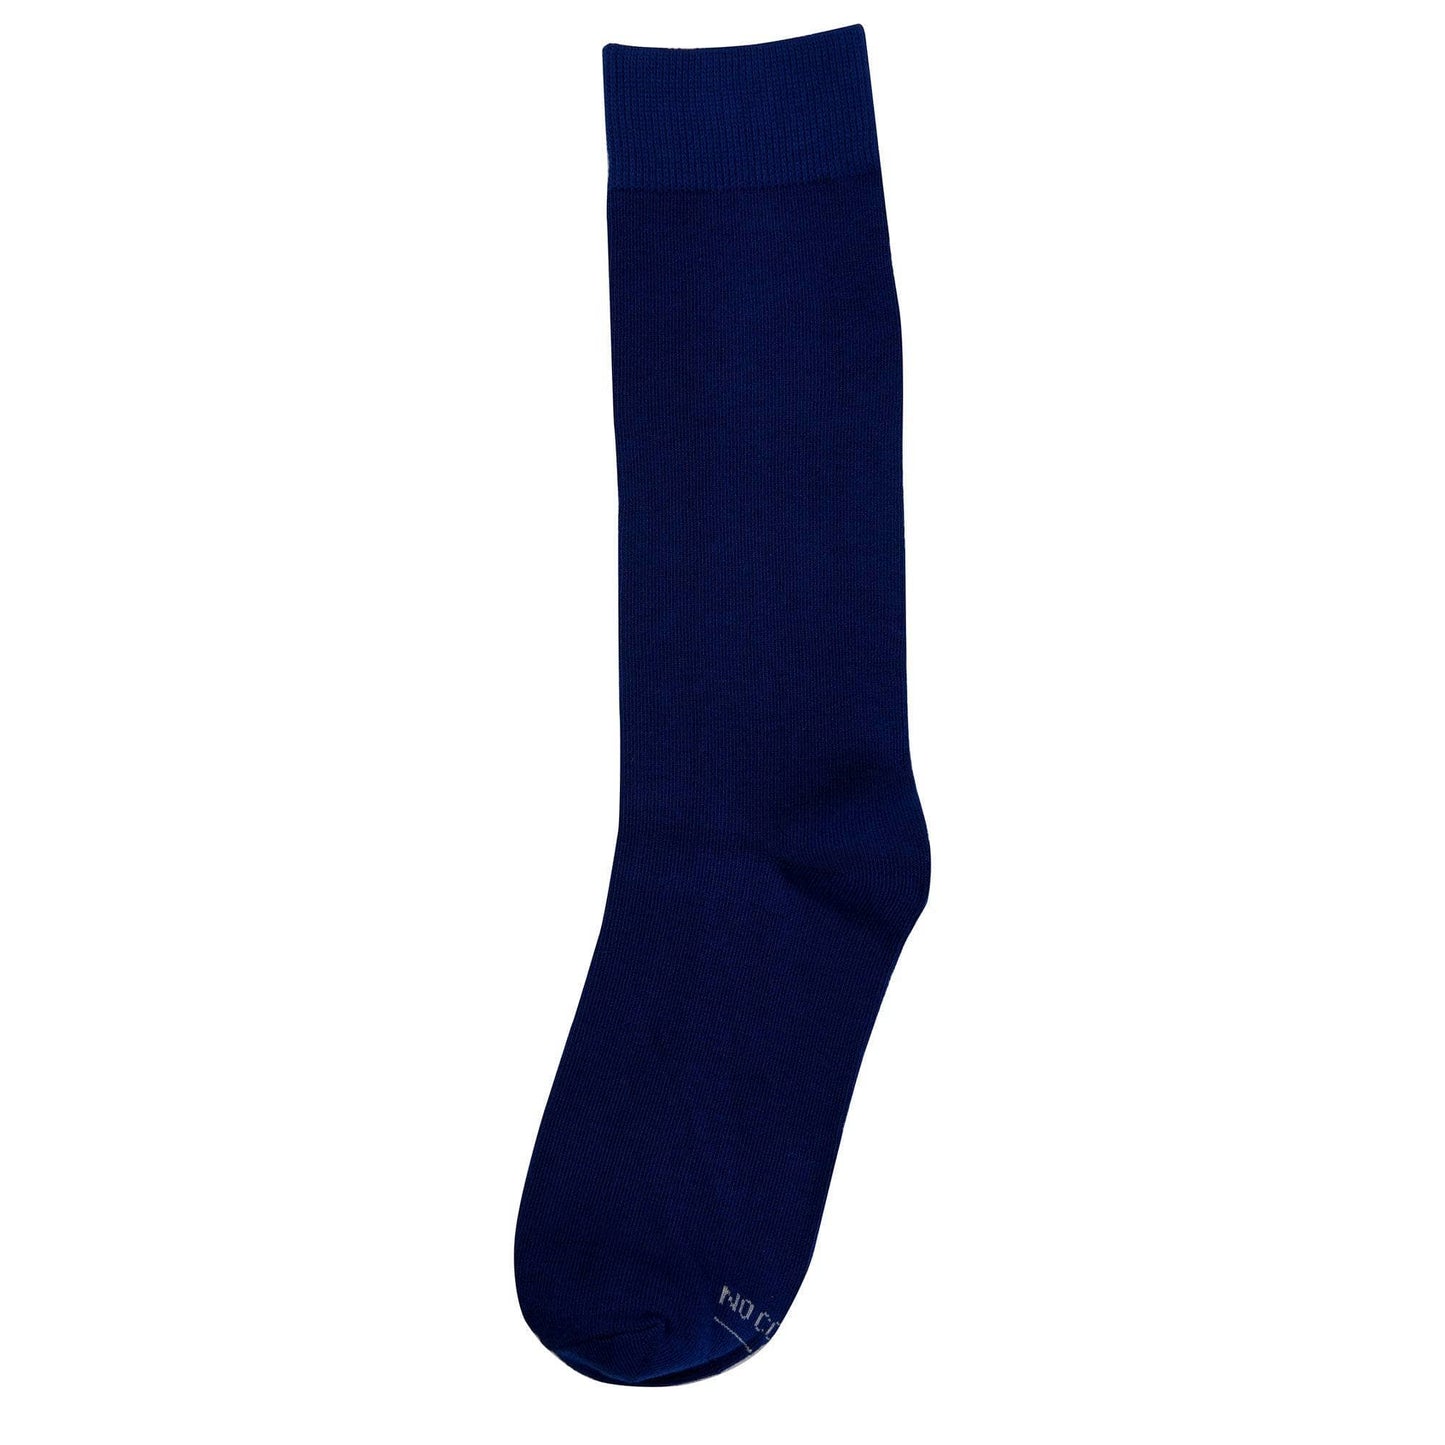 The No Cold Feet - Navy - Men's Gifts - Manly Bands